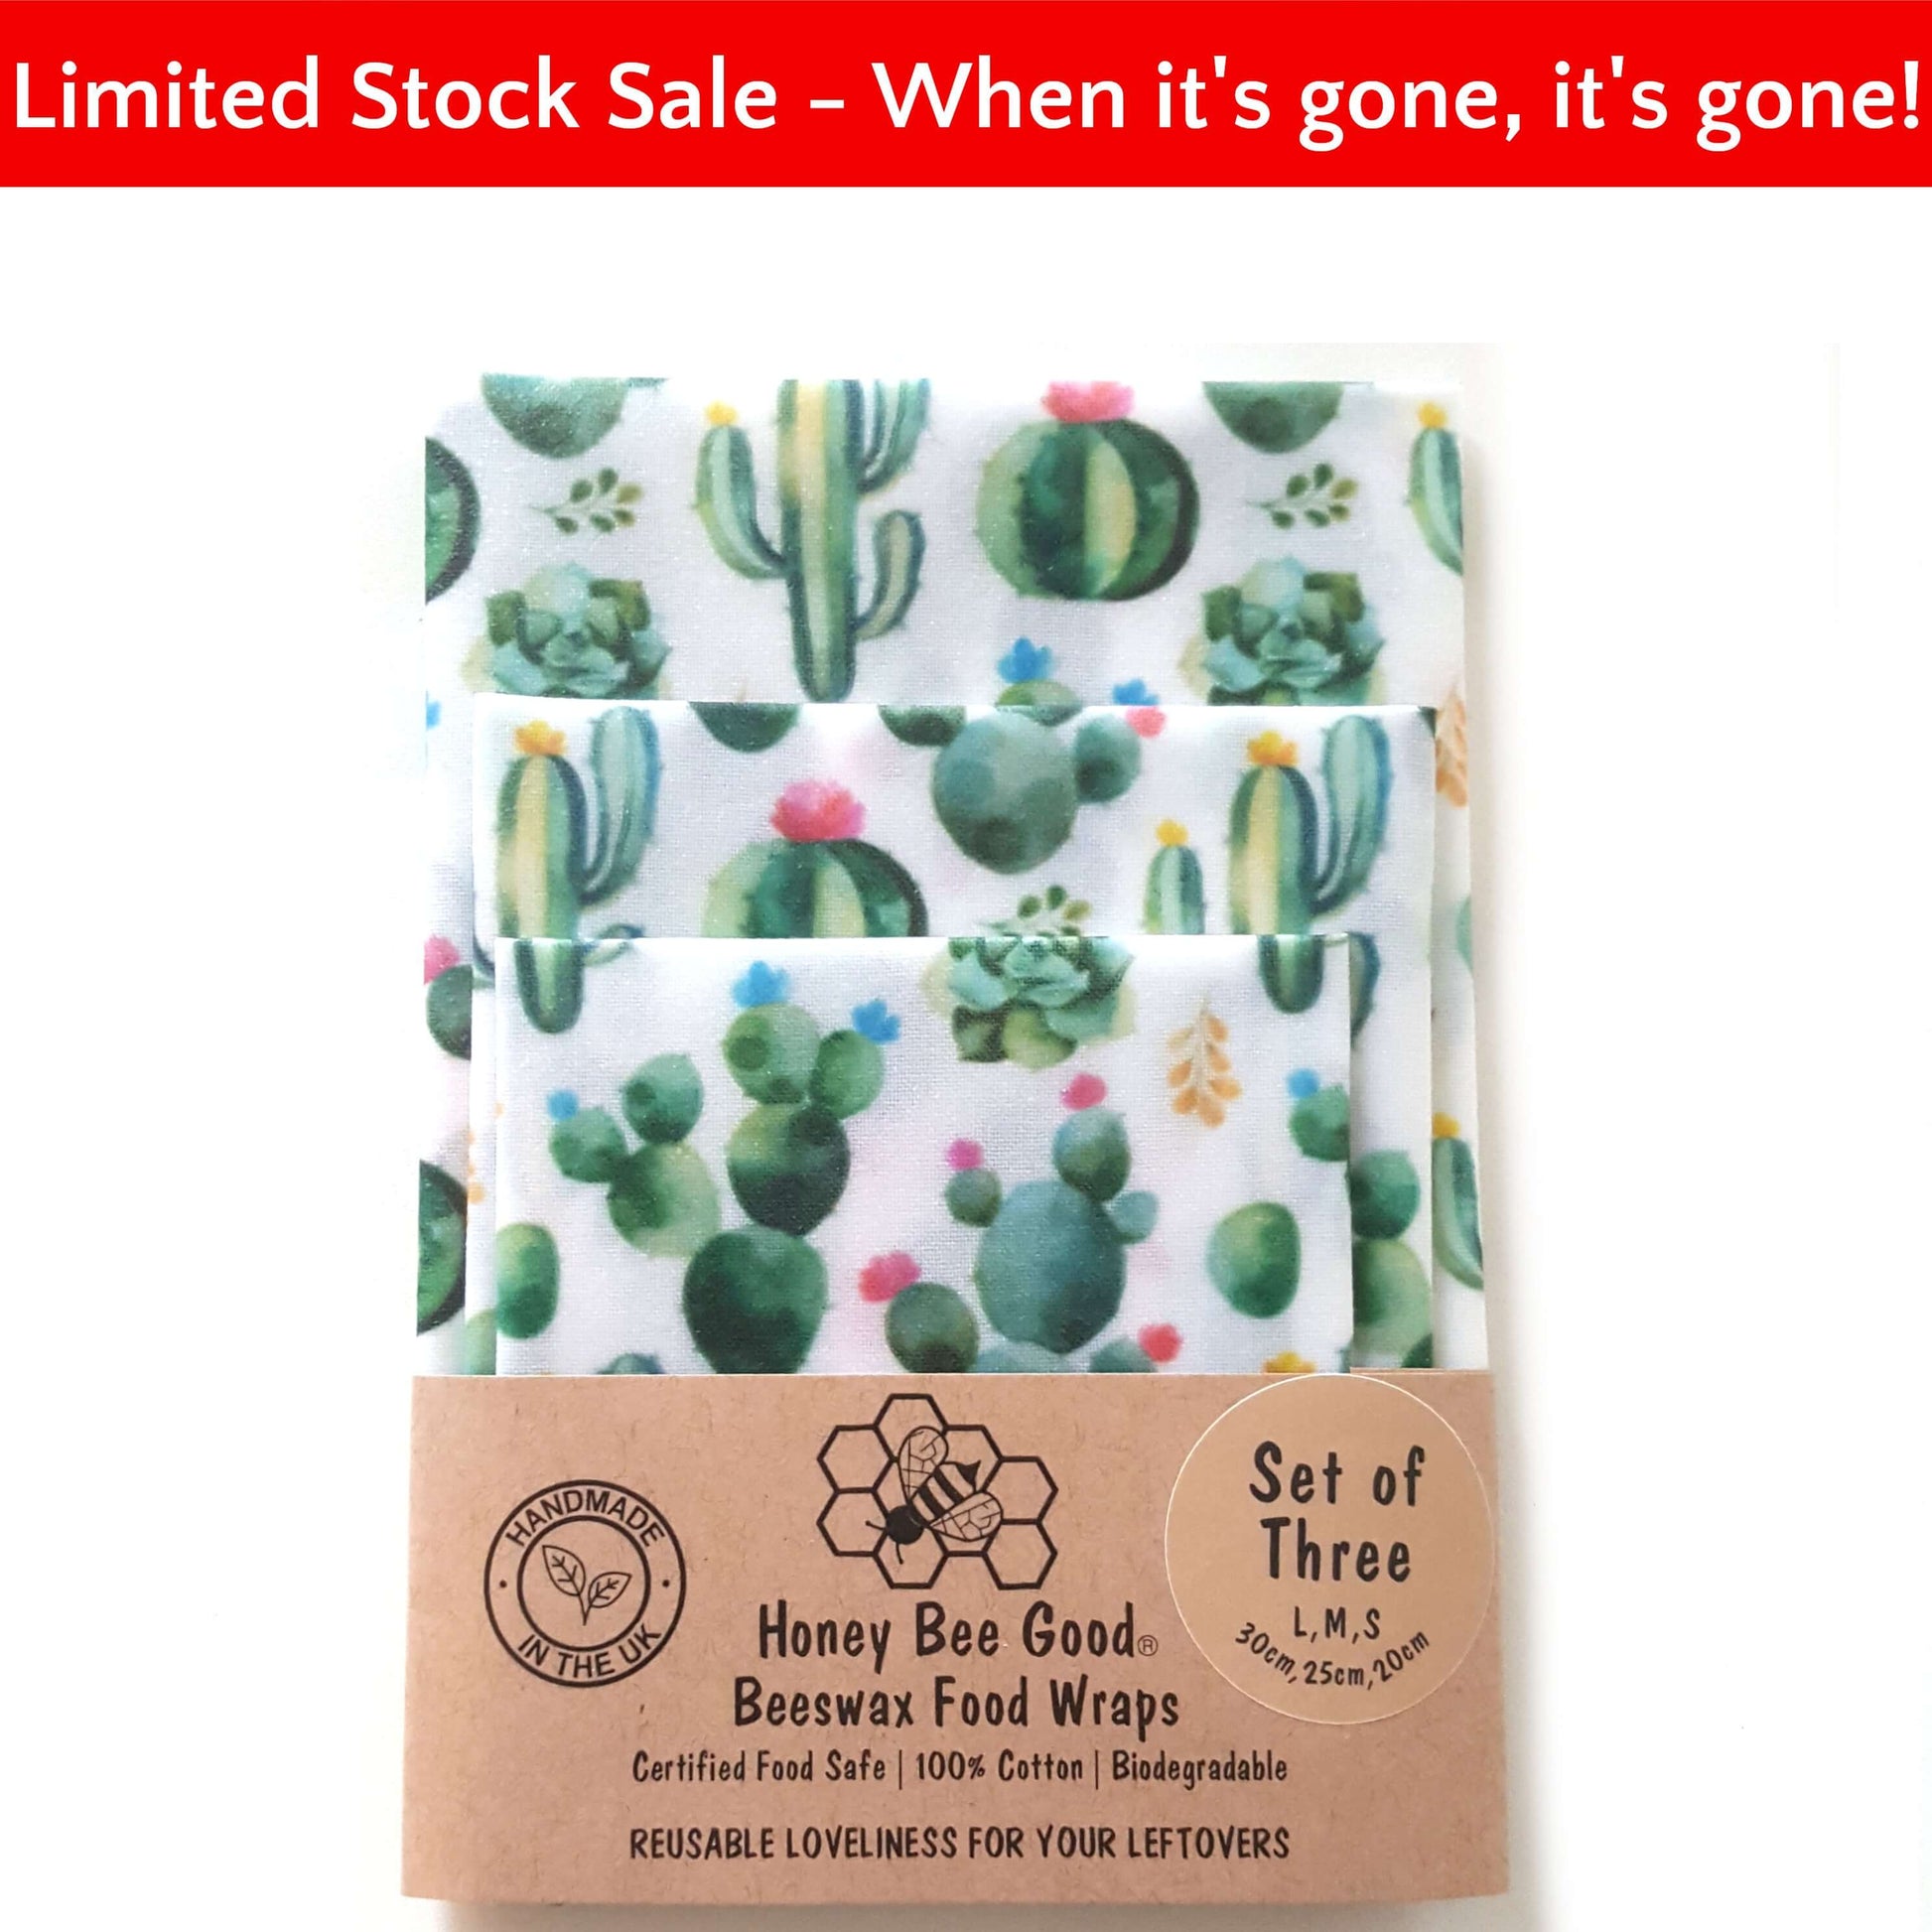 Reusable Beeswax Food Wraps 100% Hand Made in the UK by Honey Bee Good shown in Set of 3 in Cactus pattern